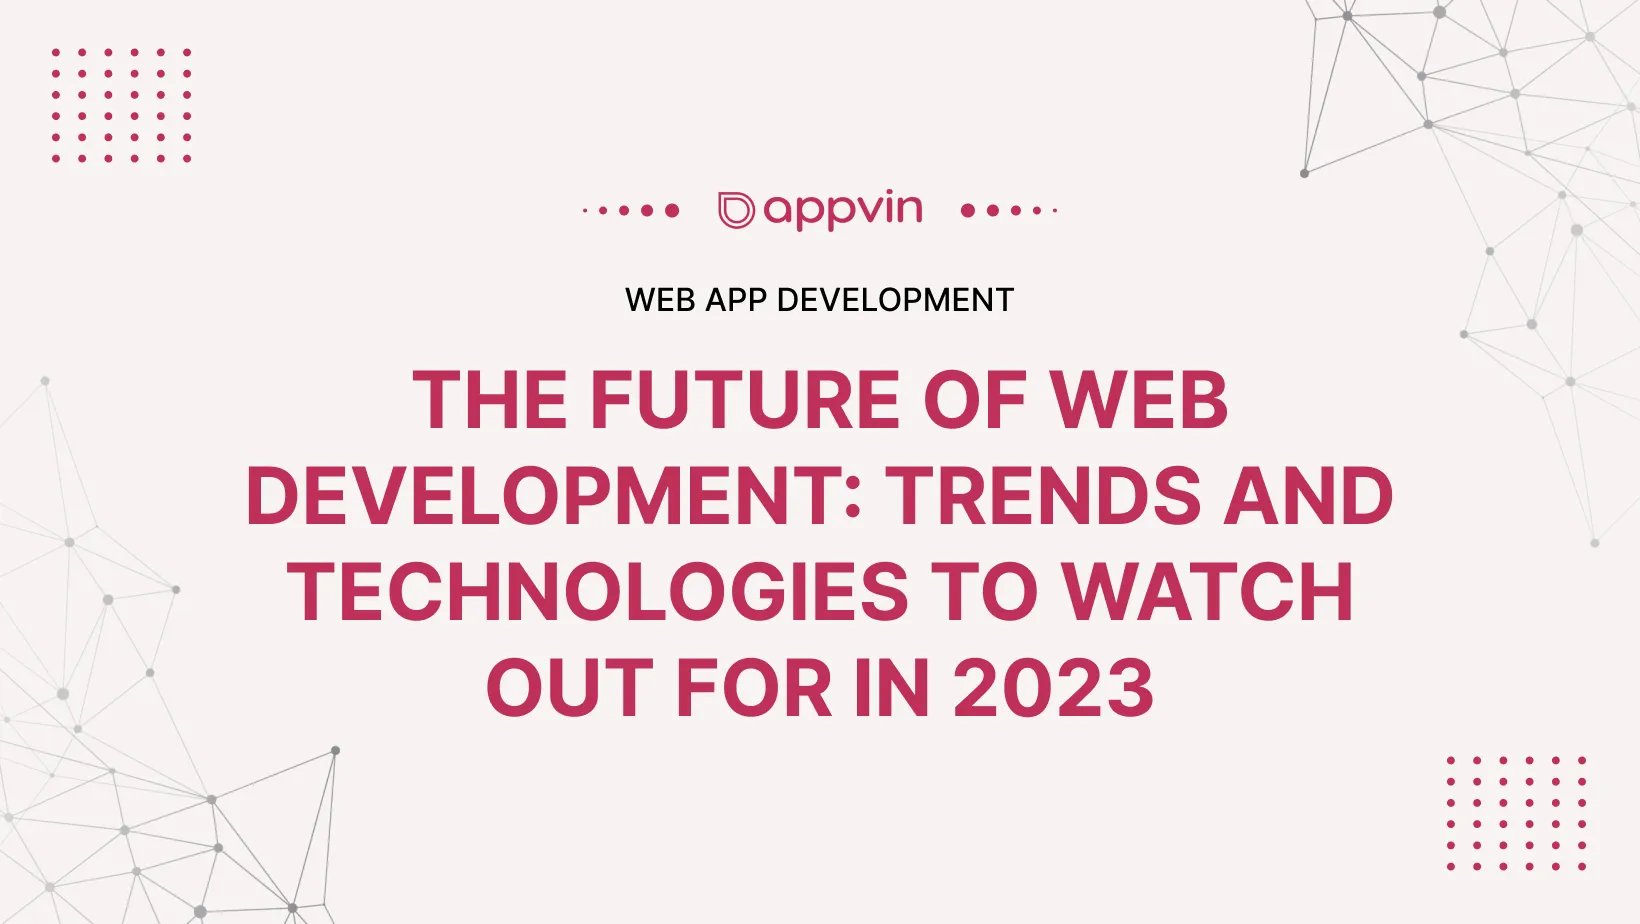 The Future of Web Development: Trends and Technologies to Watch Out For in 2023 